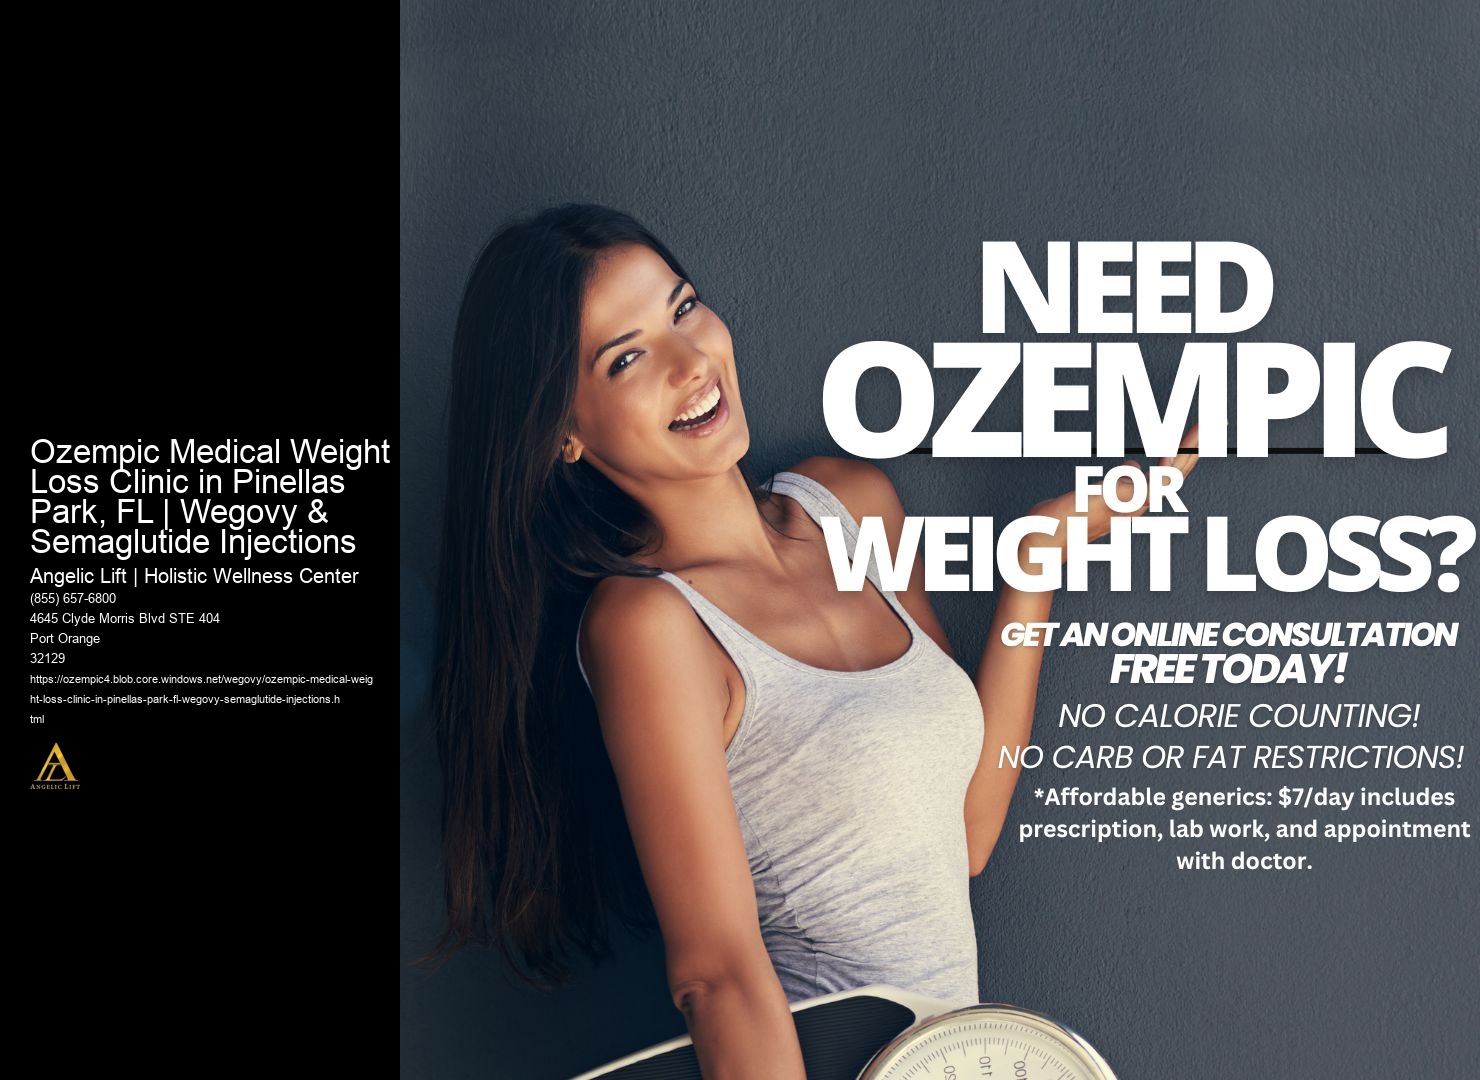 Ozempic Medical Weight Loss Clinic in Pinellas Park, FL | Wegovy & Semaglutide Injections